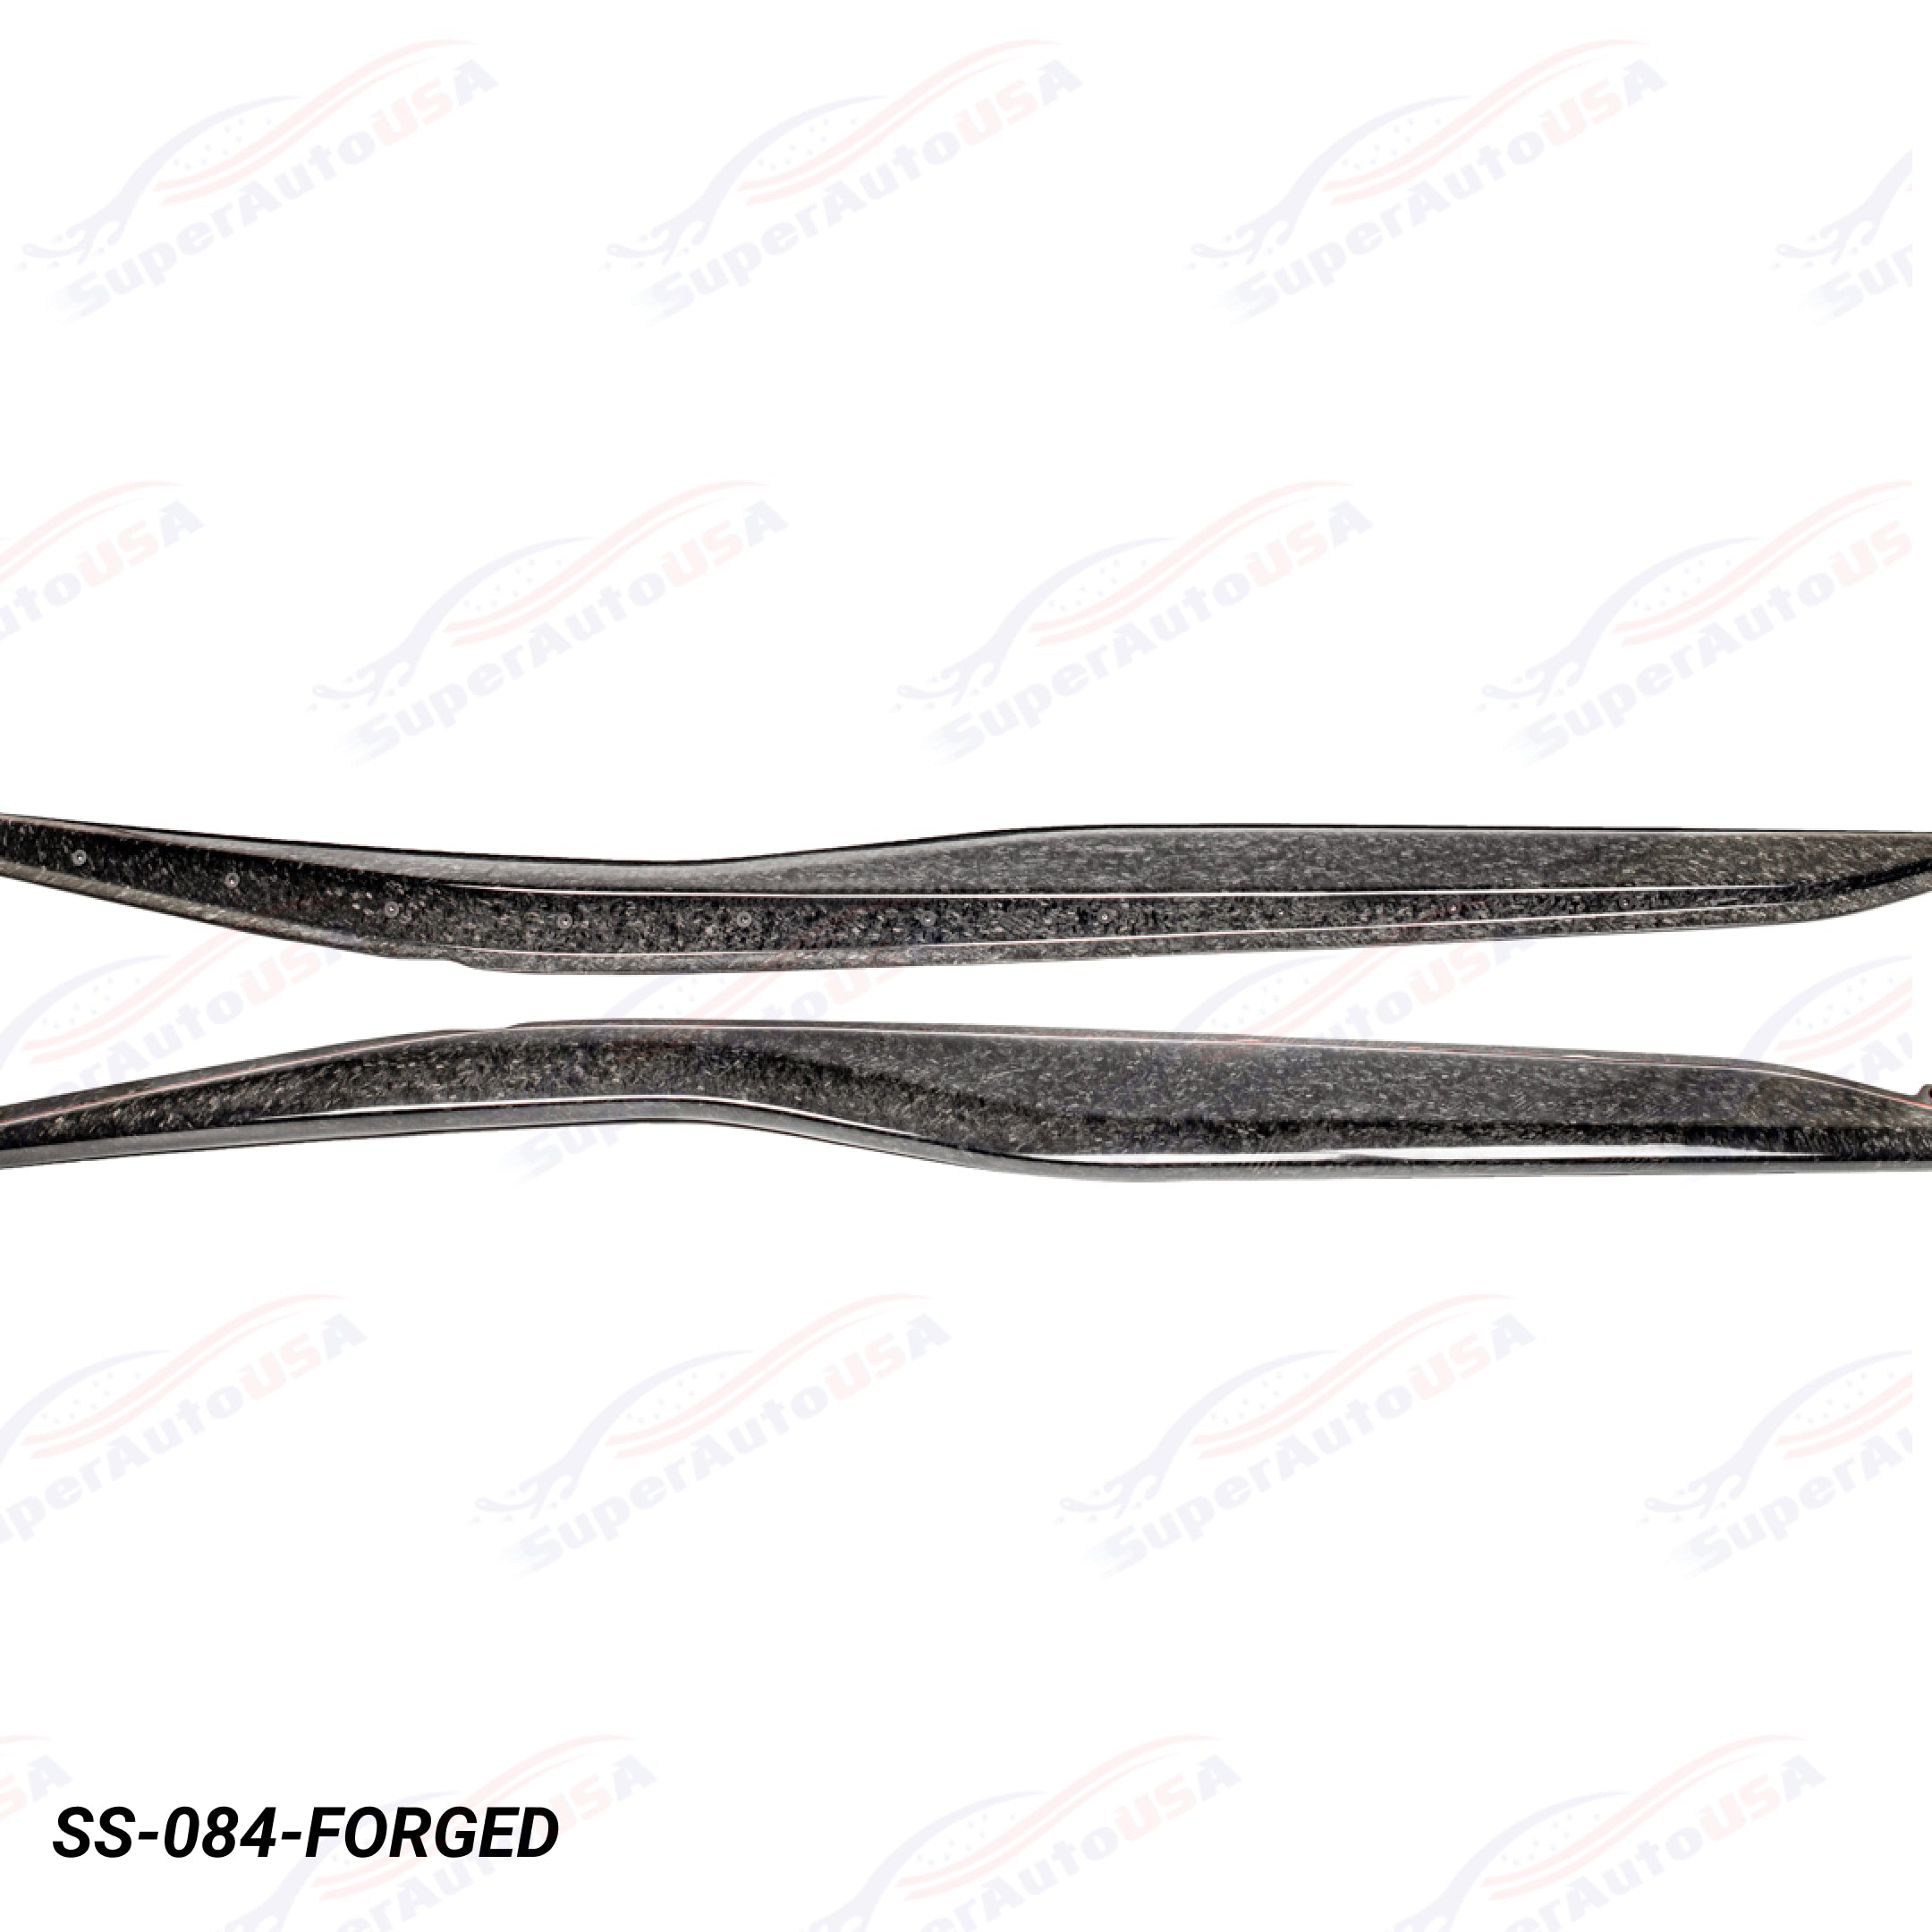 Buy forged-carbon Fits 2014-19 Corvette C7 Z06 Style Side Skirts Rocker Panel Extension